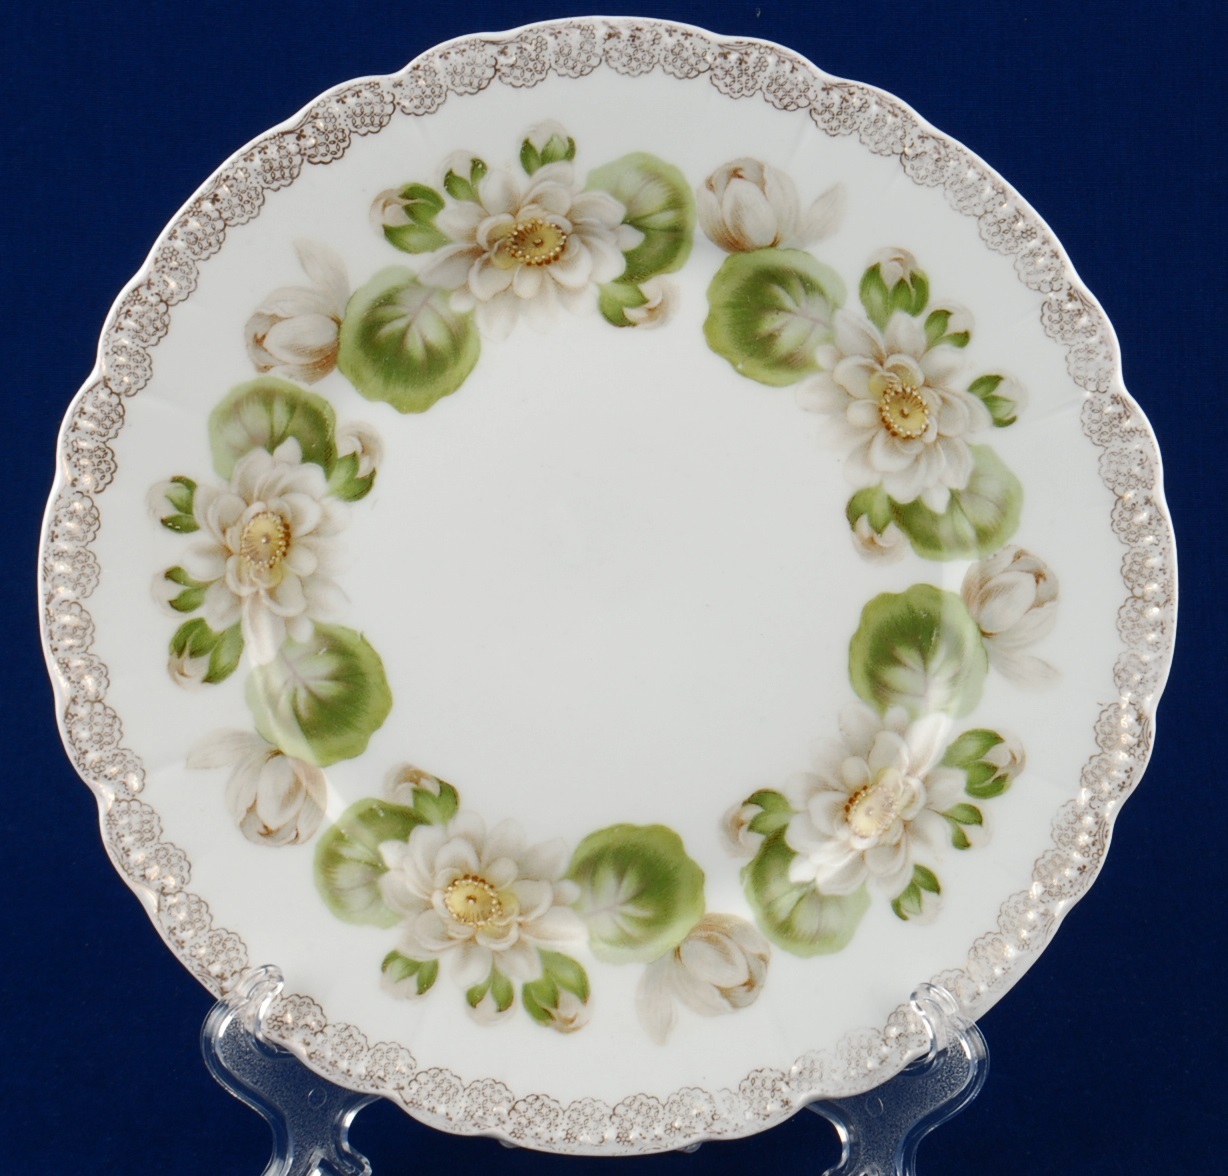 Primary image for Rosenthal - Continental RC Malmaison Water Lily 8.5" Salad Plate